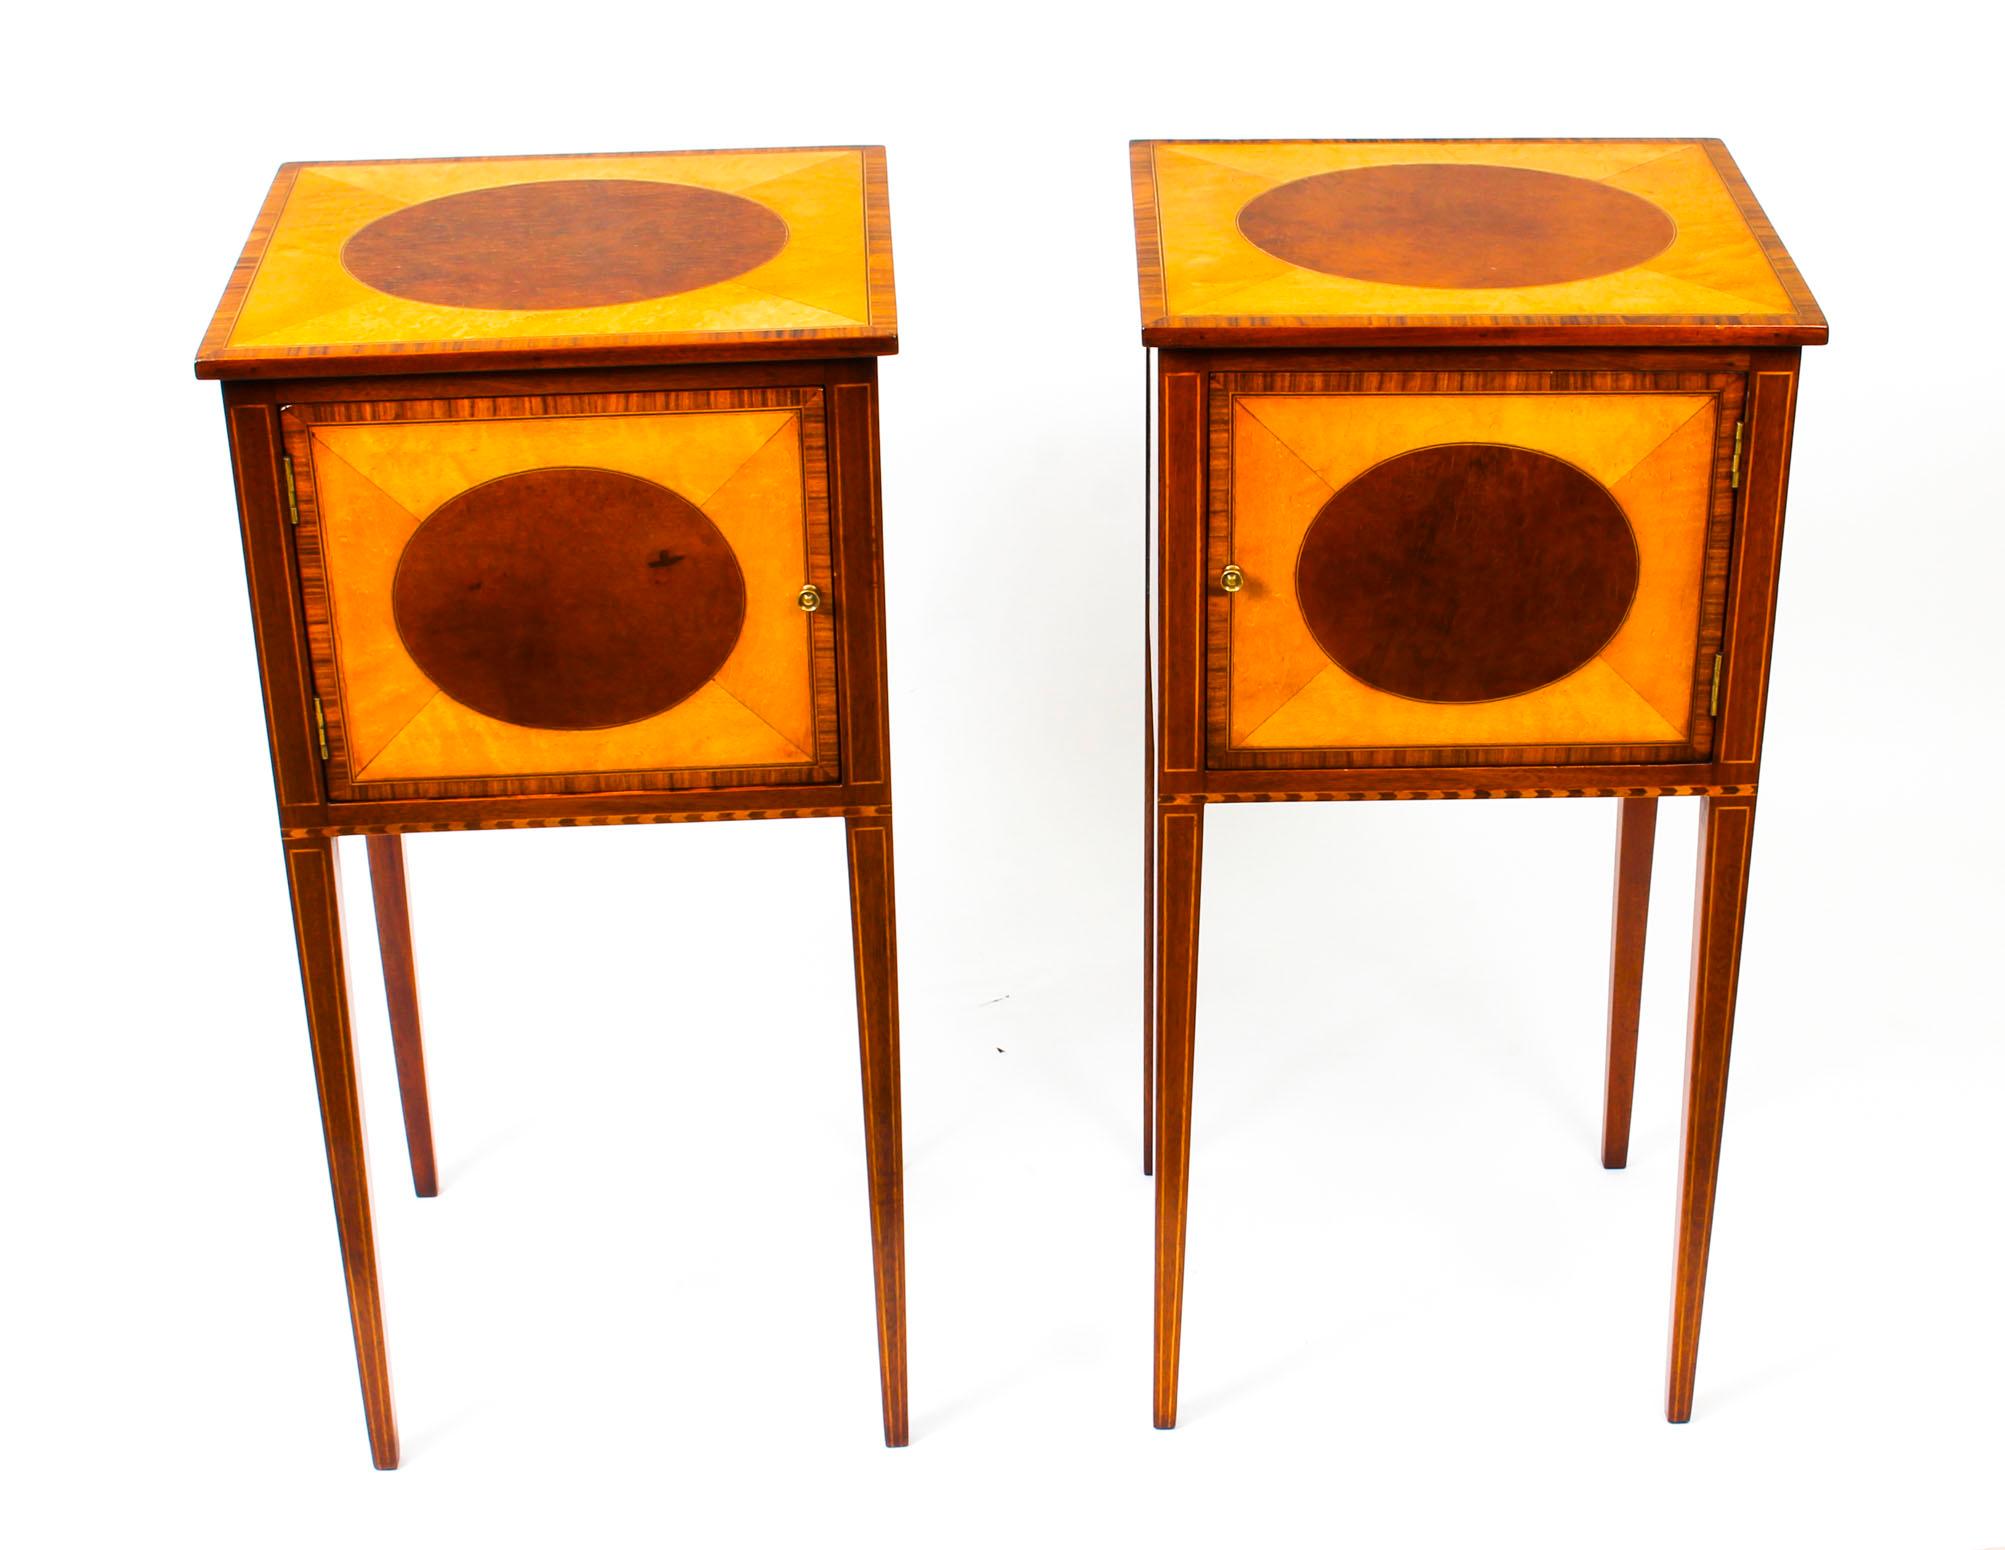 A lovely pair of antique Victorian Sheraton design mahogany and sycamore bedside cabinets circa 1880 in date.

The rectangular tops feature inlaid oval frames in sycamore, crossbanded in tulip wood, above a single door. They are raised on square